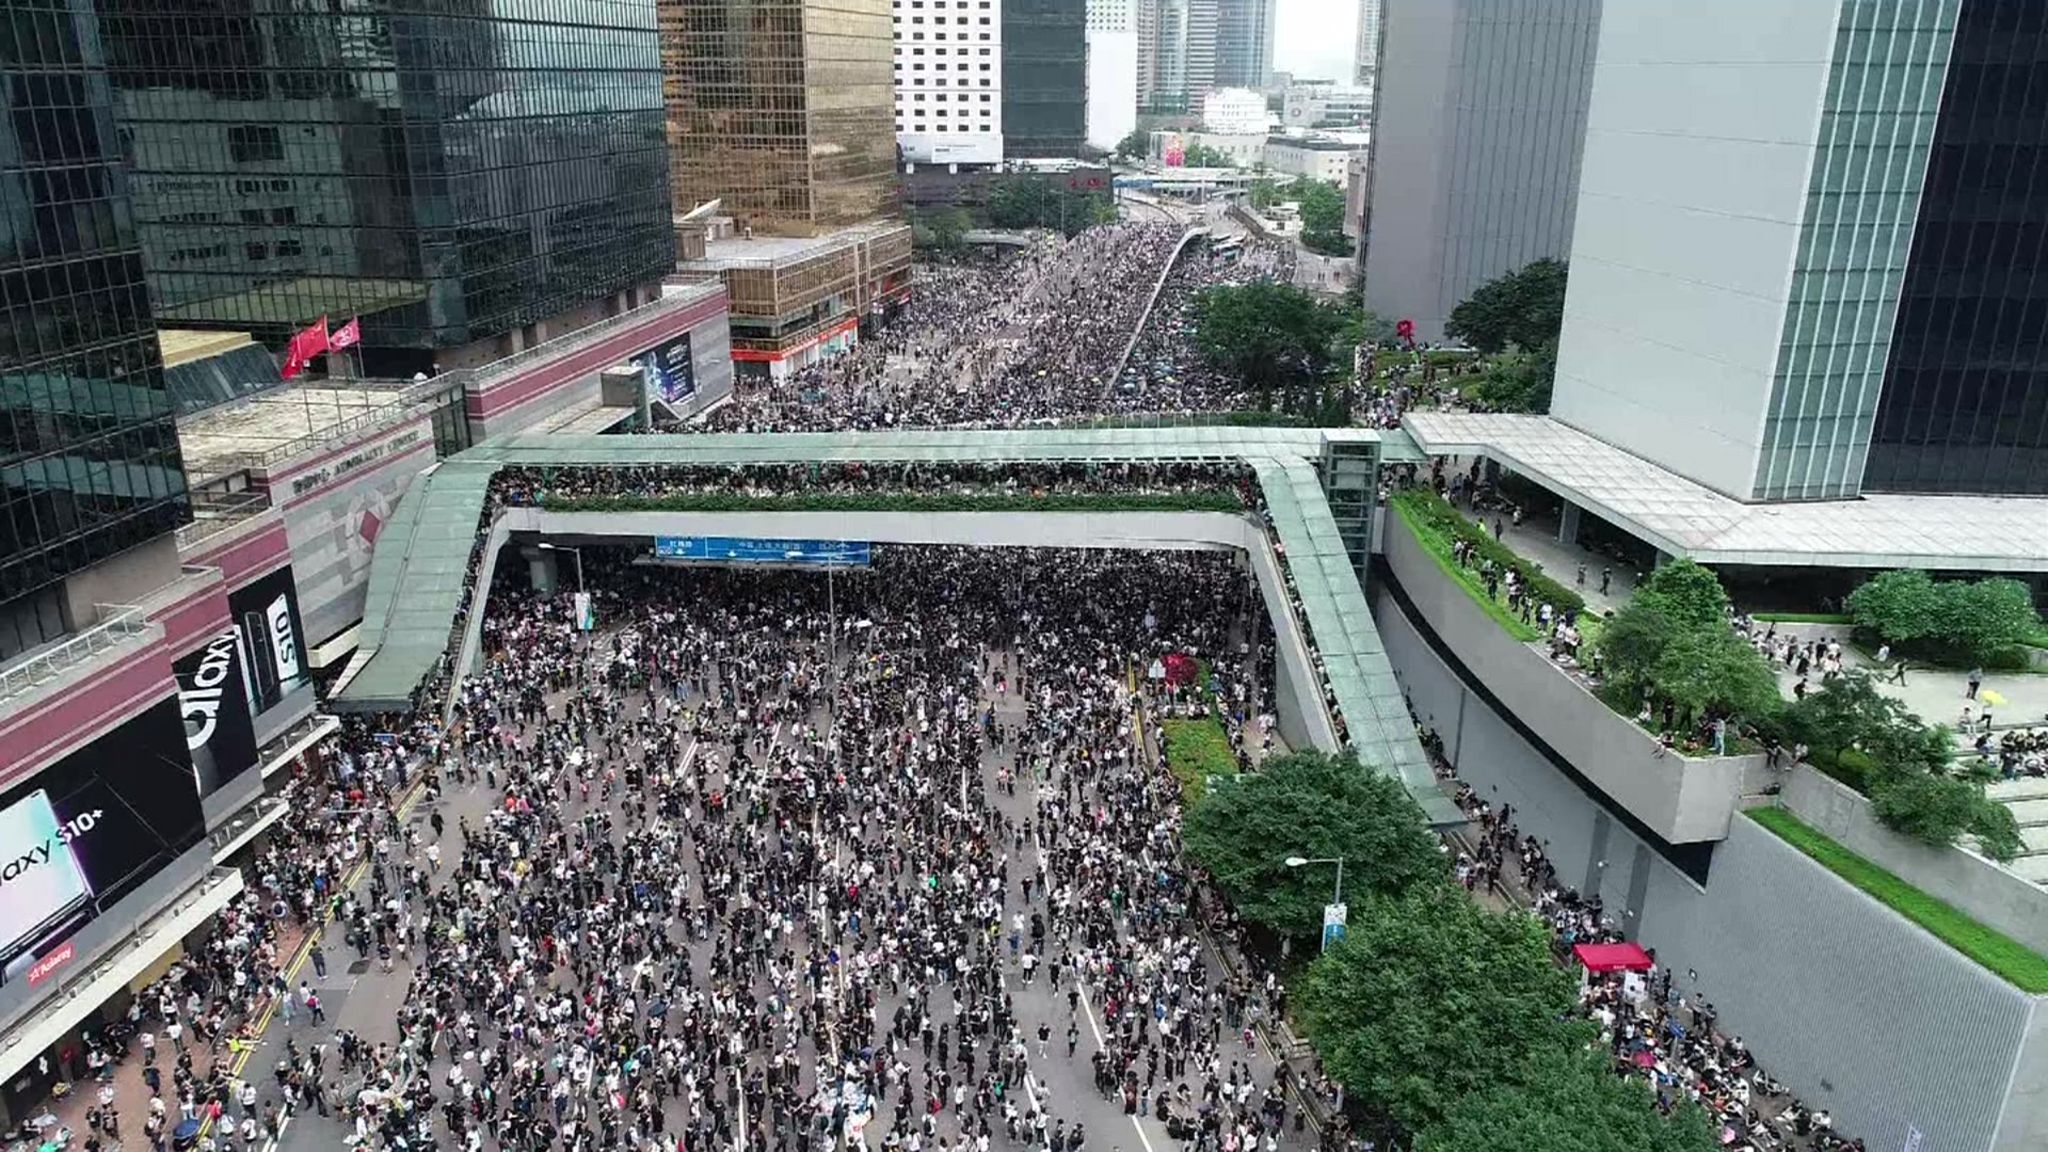 Protests in HK on 12 June against extradition bill